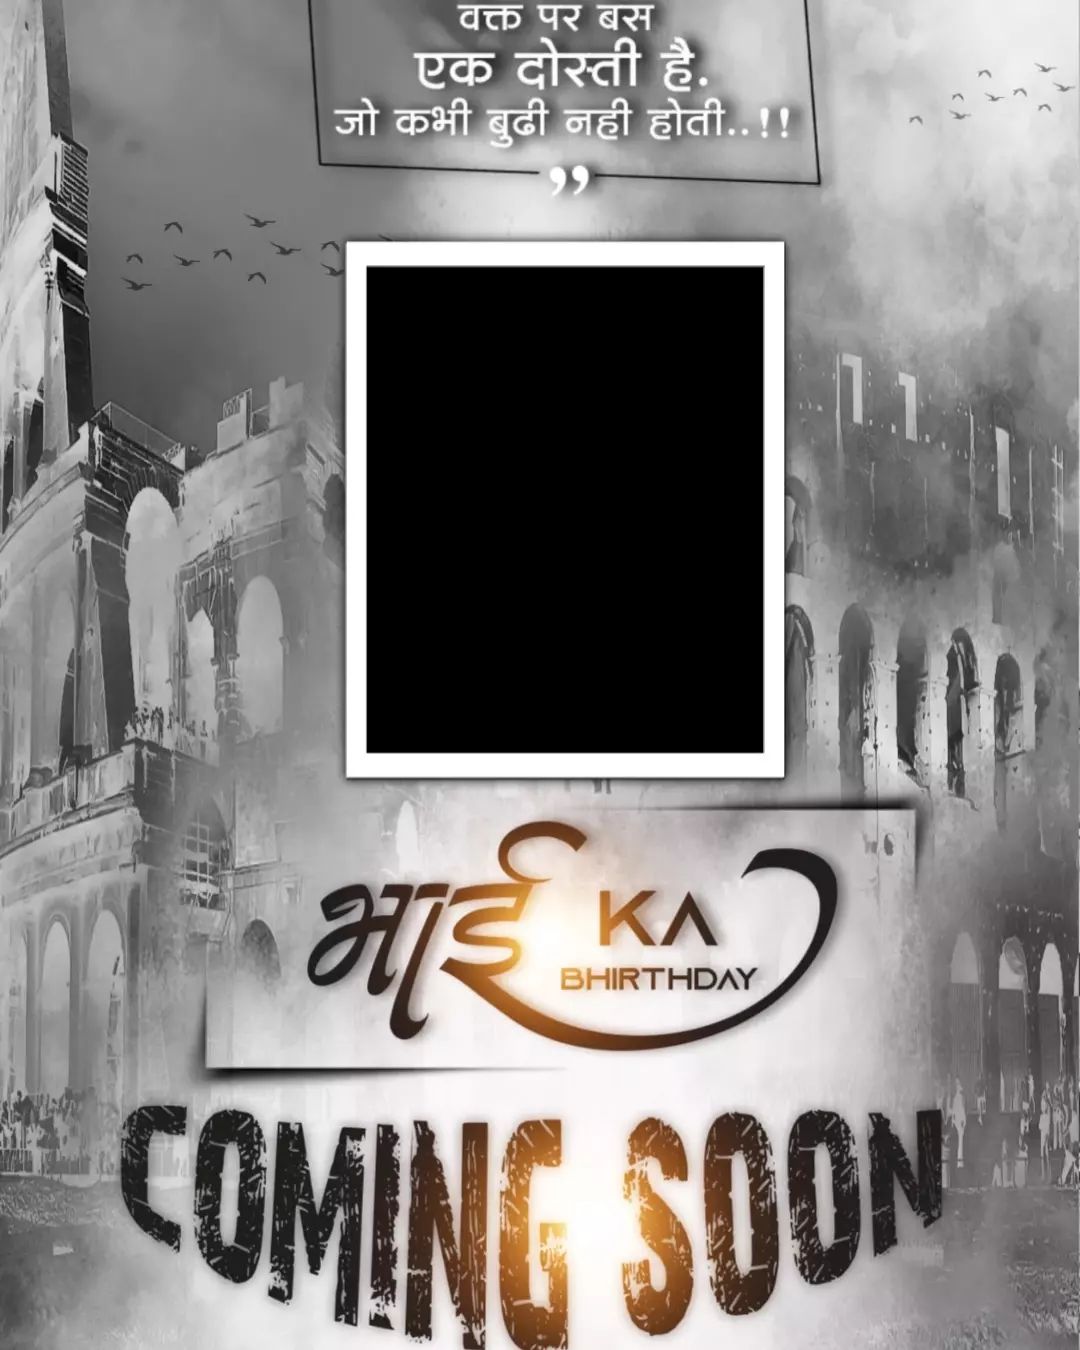  Bhai Coming Soon Banner Background Full HD Download Free | CBEditz